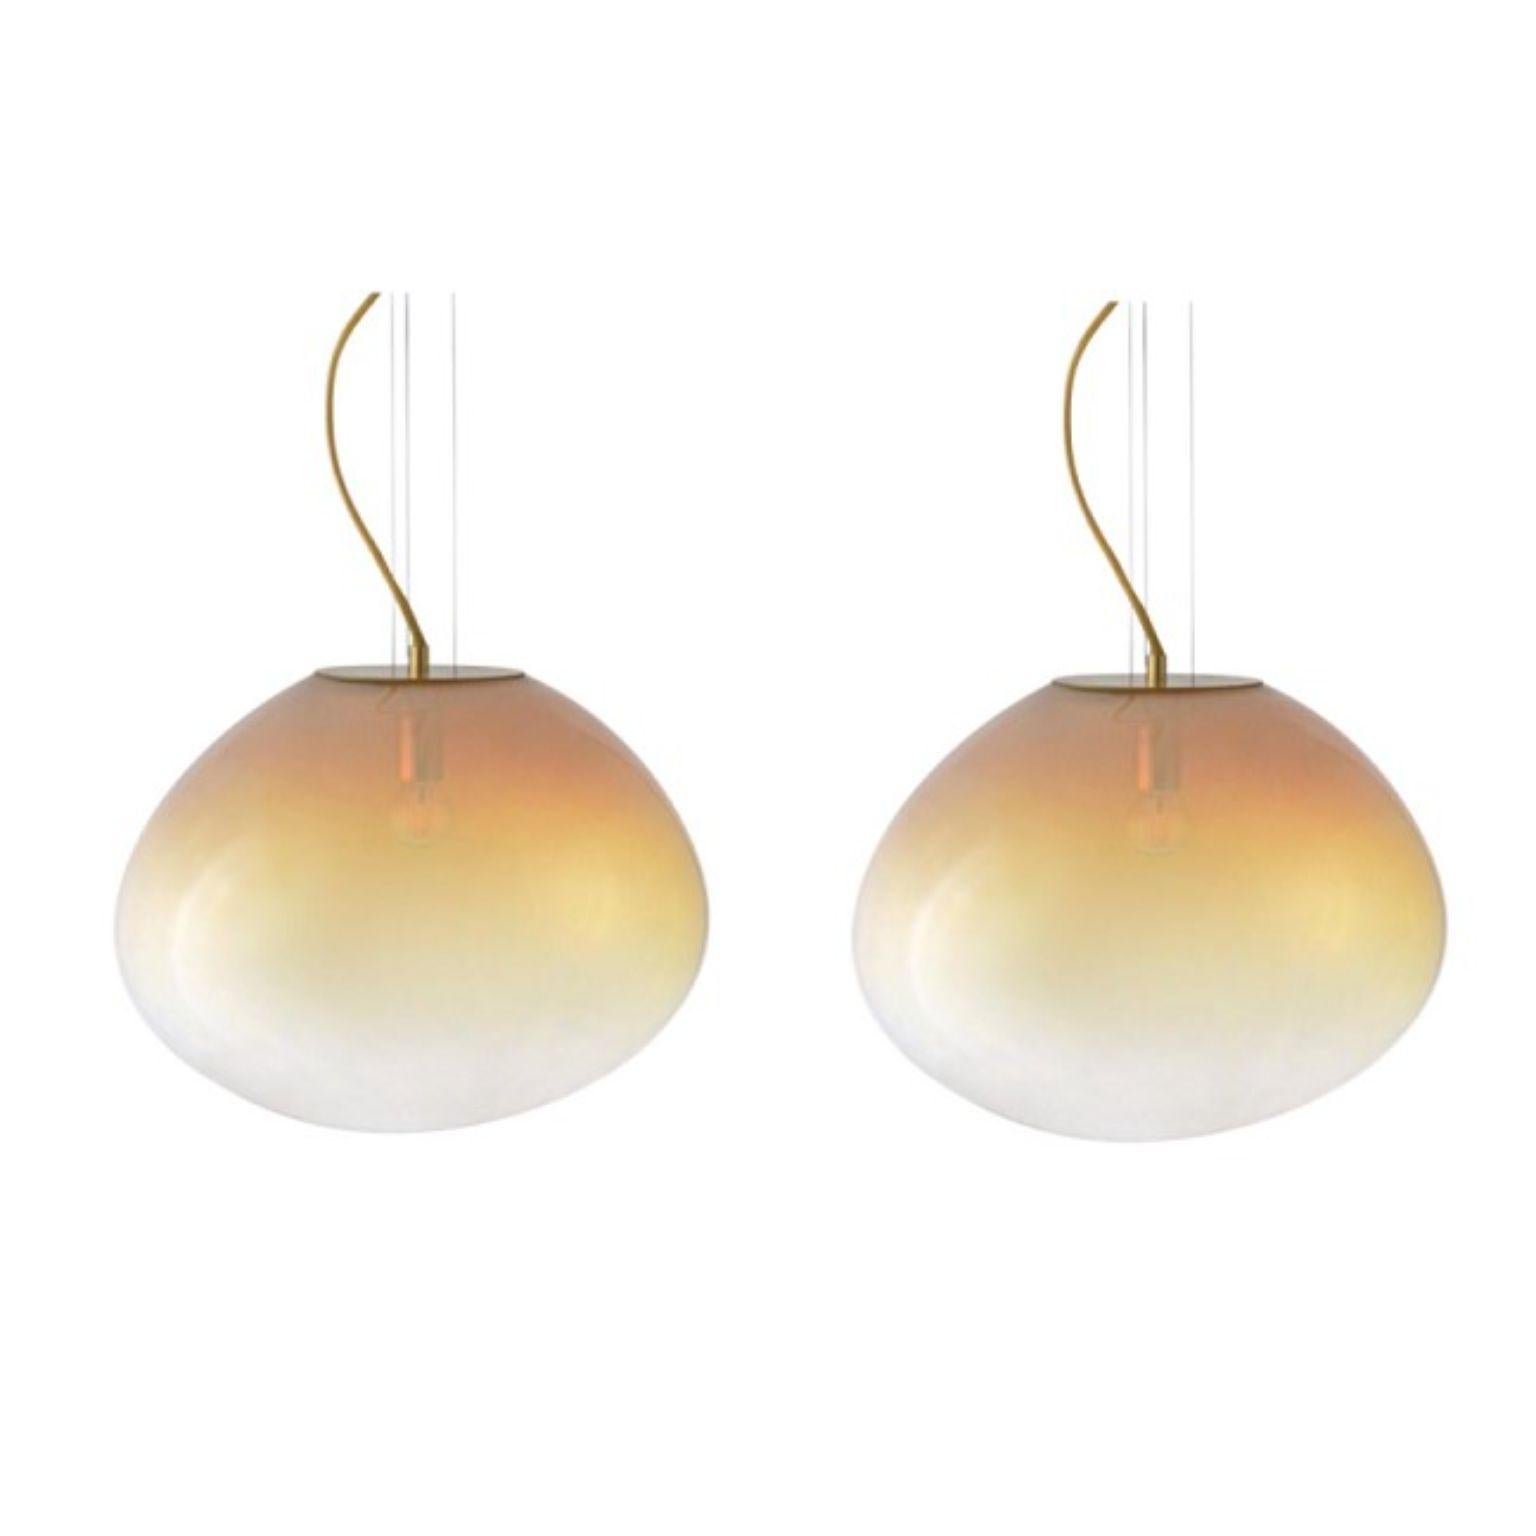 Set of 2 Sirius L pendants by Eloa.
No UL listed 
Material: LED Bulb, glass.
Dimensions: D39 x W40 x H32 cm.
Also Available in different colours and dimensions.

All our lamps can be wired according to each country. If sold to the USA it will be